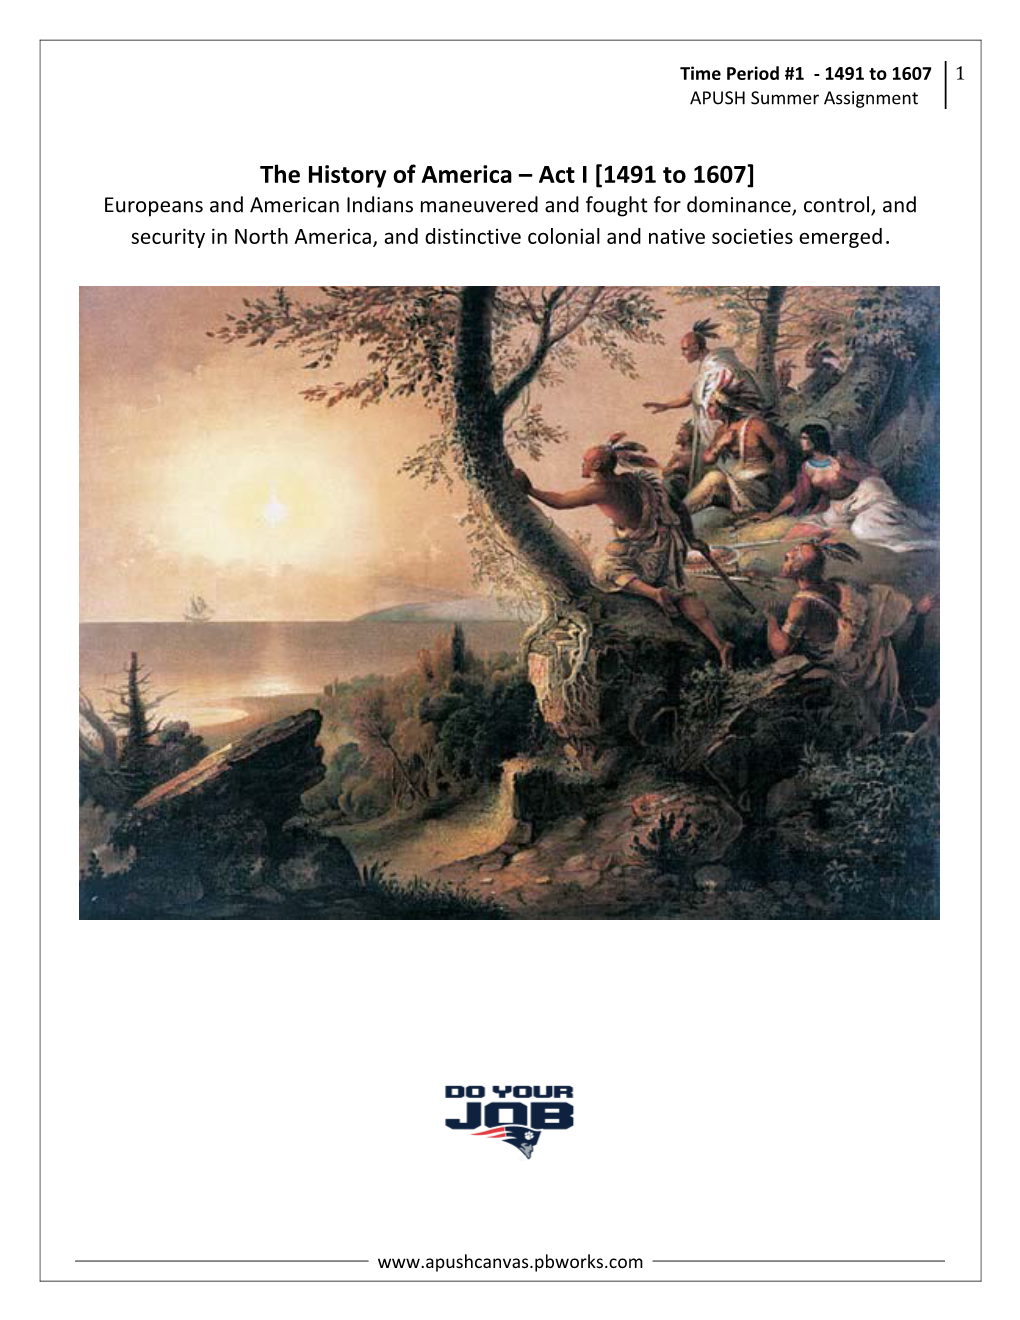 The History of America Act I 1491 to 1607